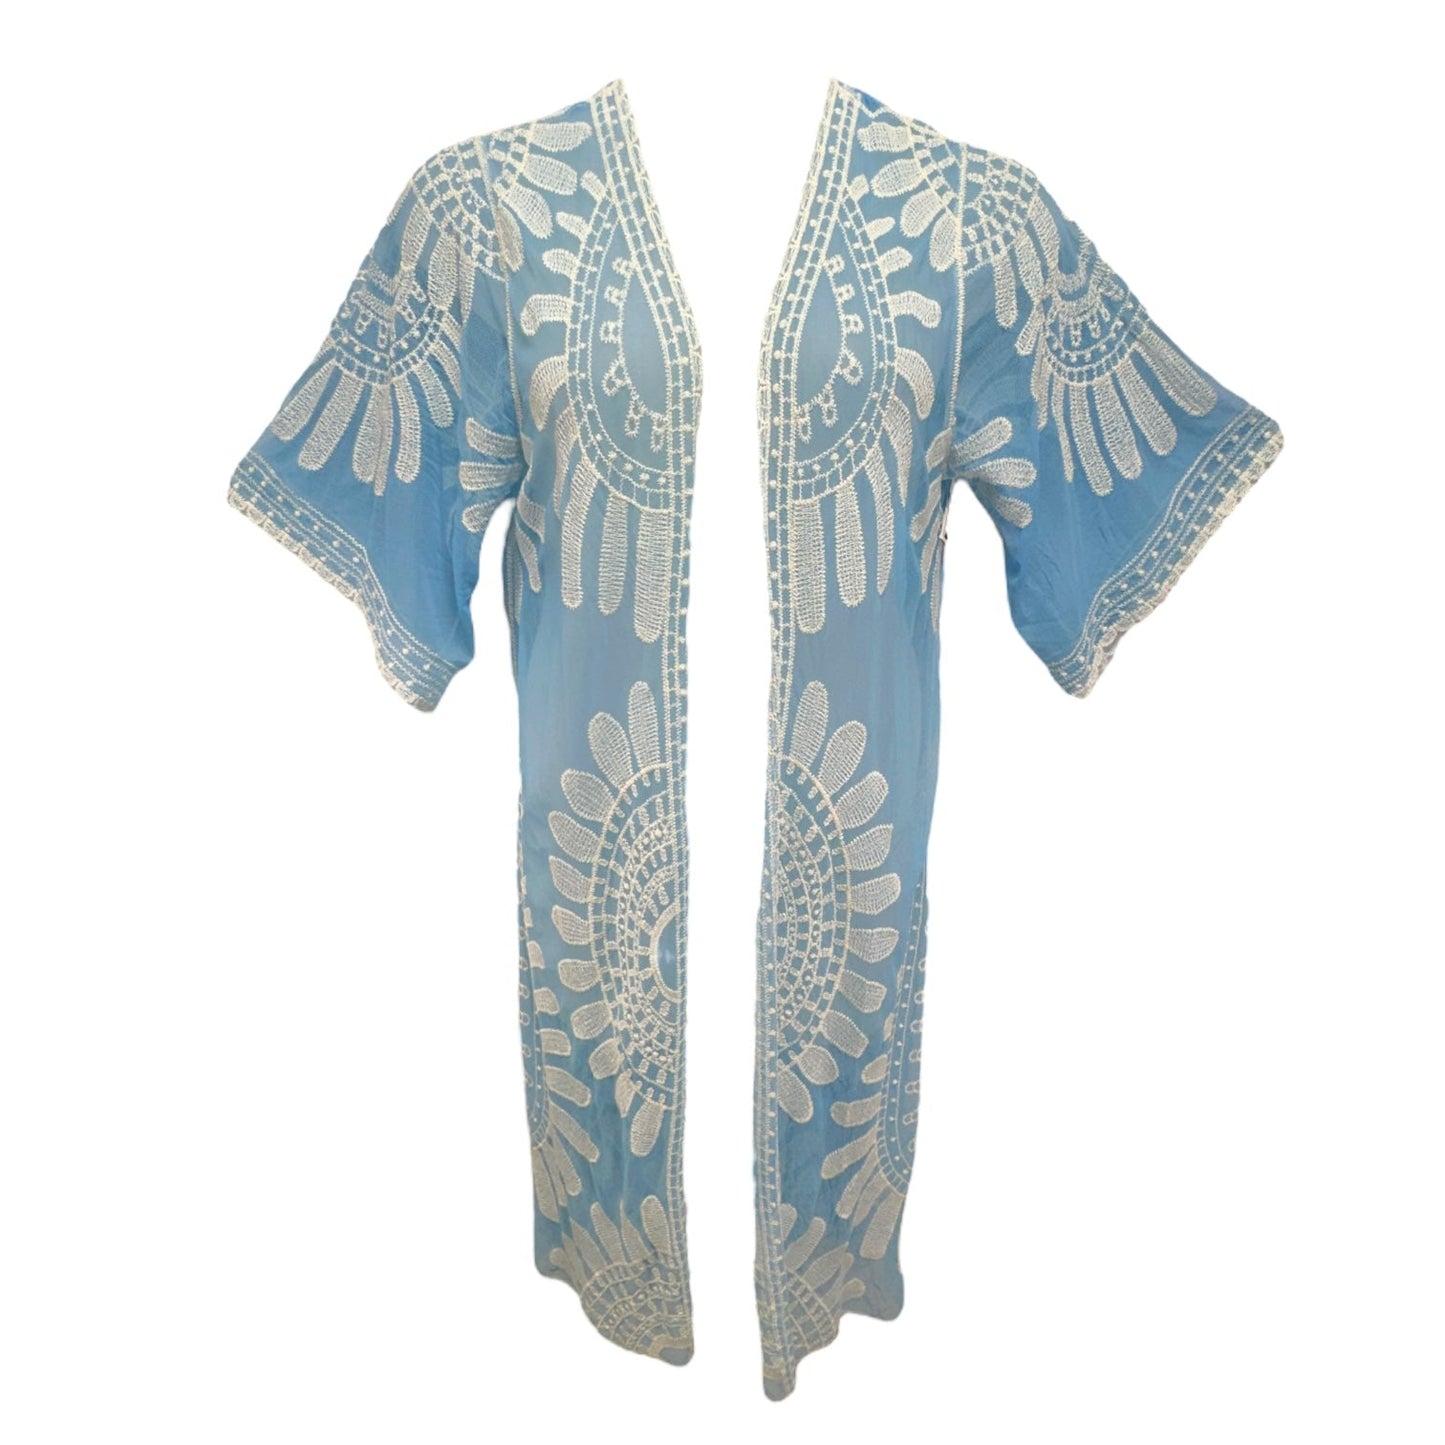 Embroidered Mesh Lace Cover-up Rebellion, Size S